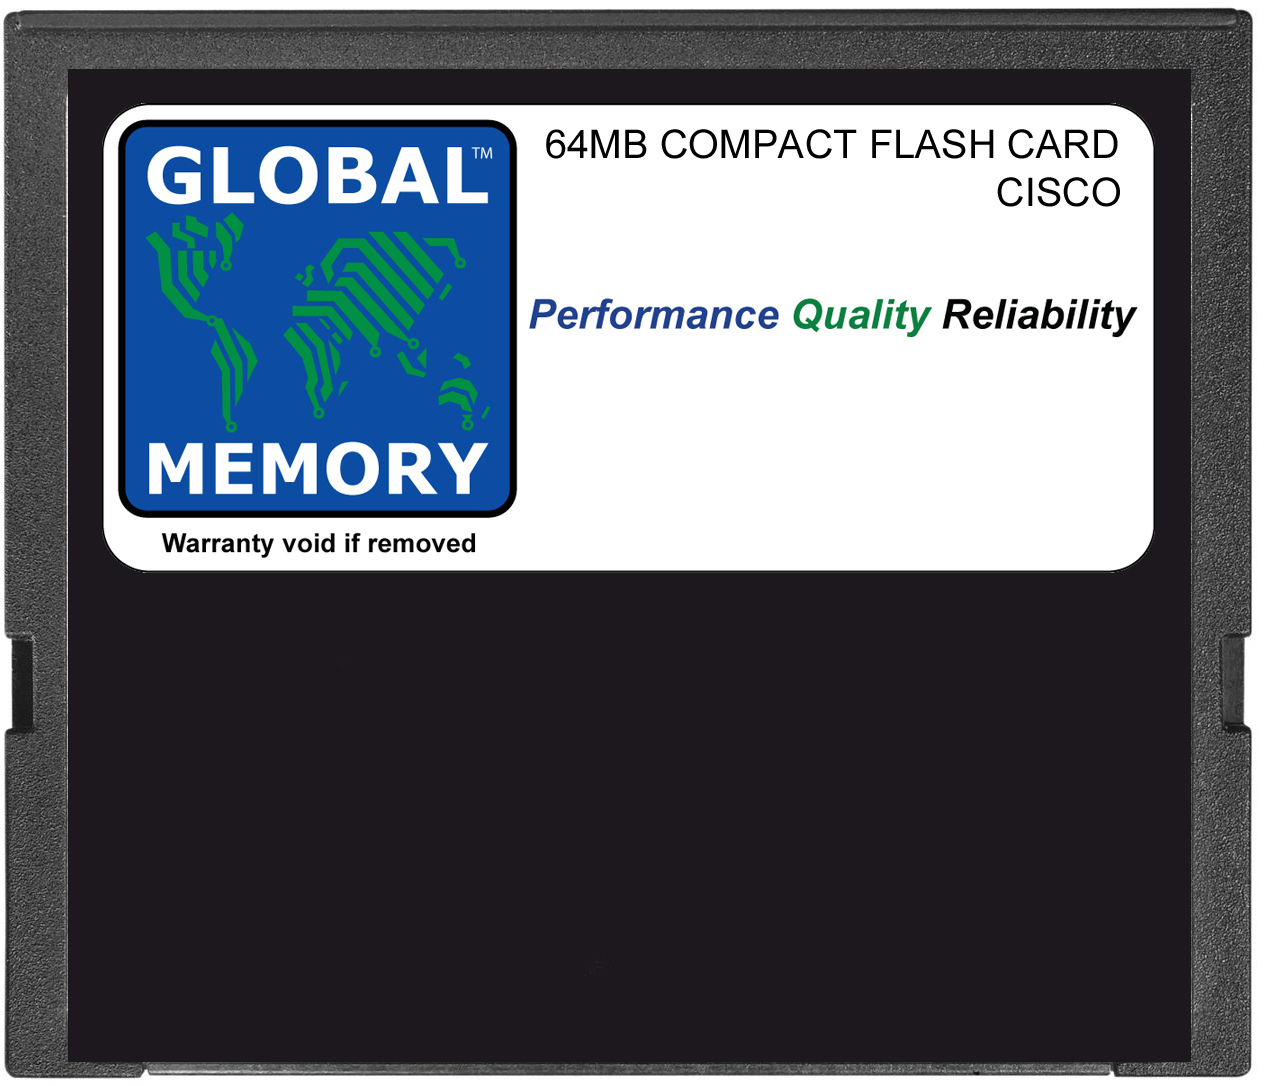 64MB COMPACT FLASH CARD MEMORY FOR CISCO 3745 ROUTER (MEM3745-64CF)